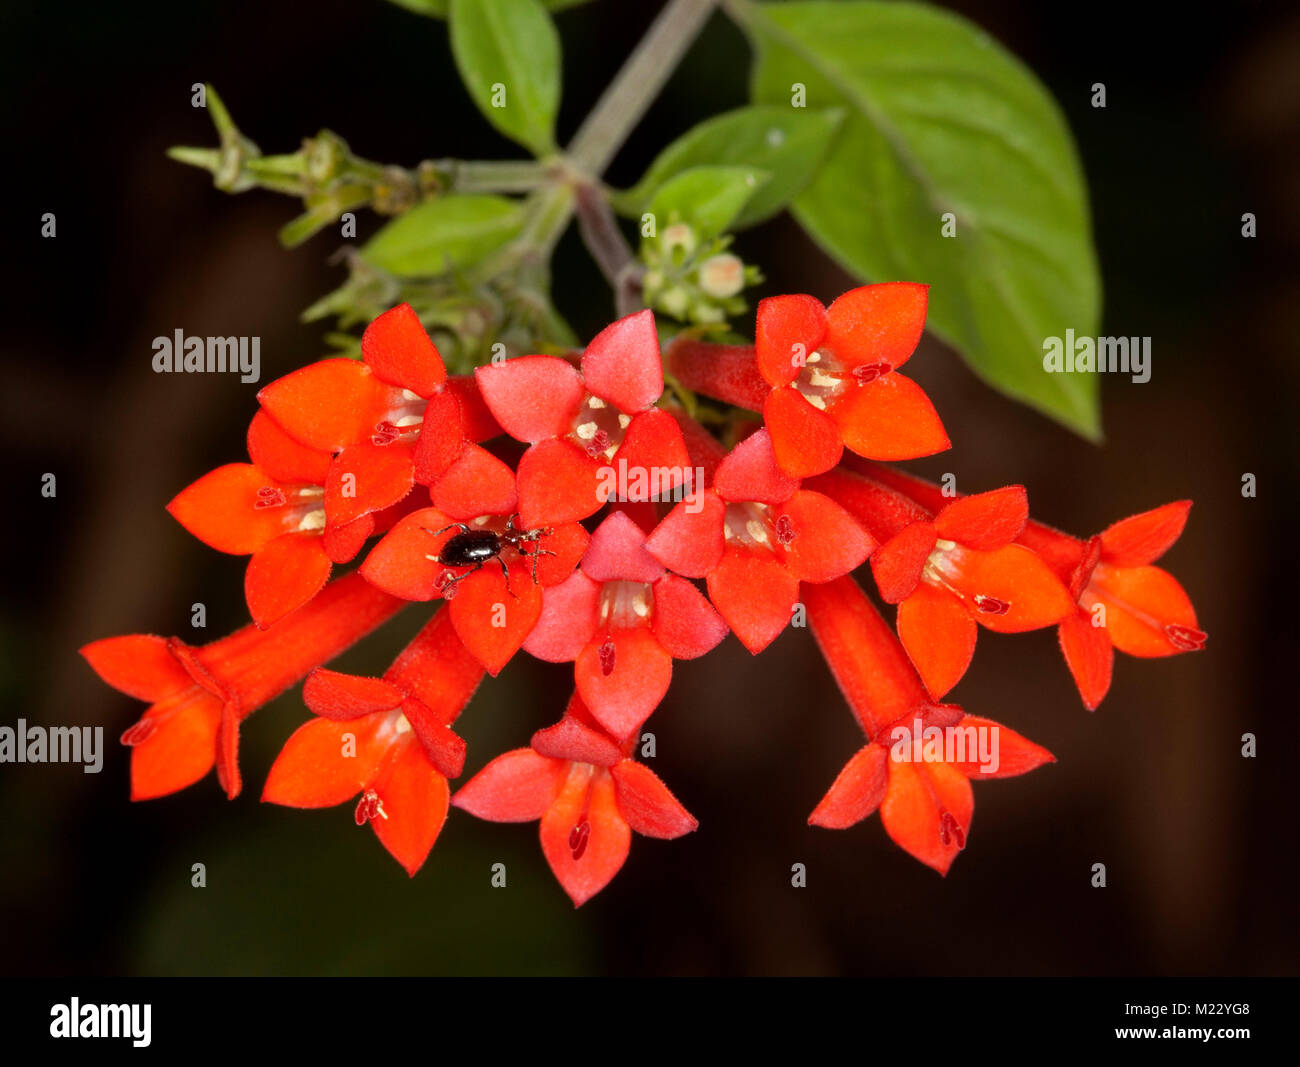 Cluster of vivid red flowers and green leaves of Bouvardia ternifolia 'Siam Sunset', and evergreen shrub,  against dark background Stock Photo